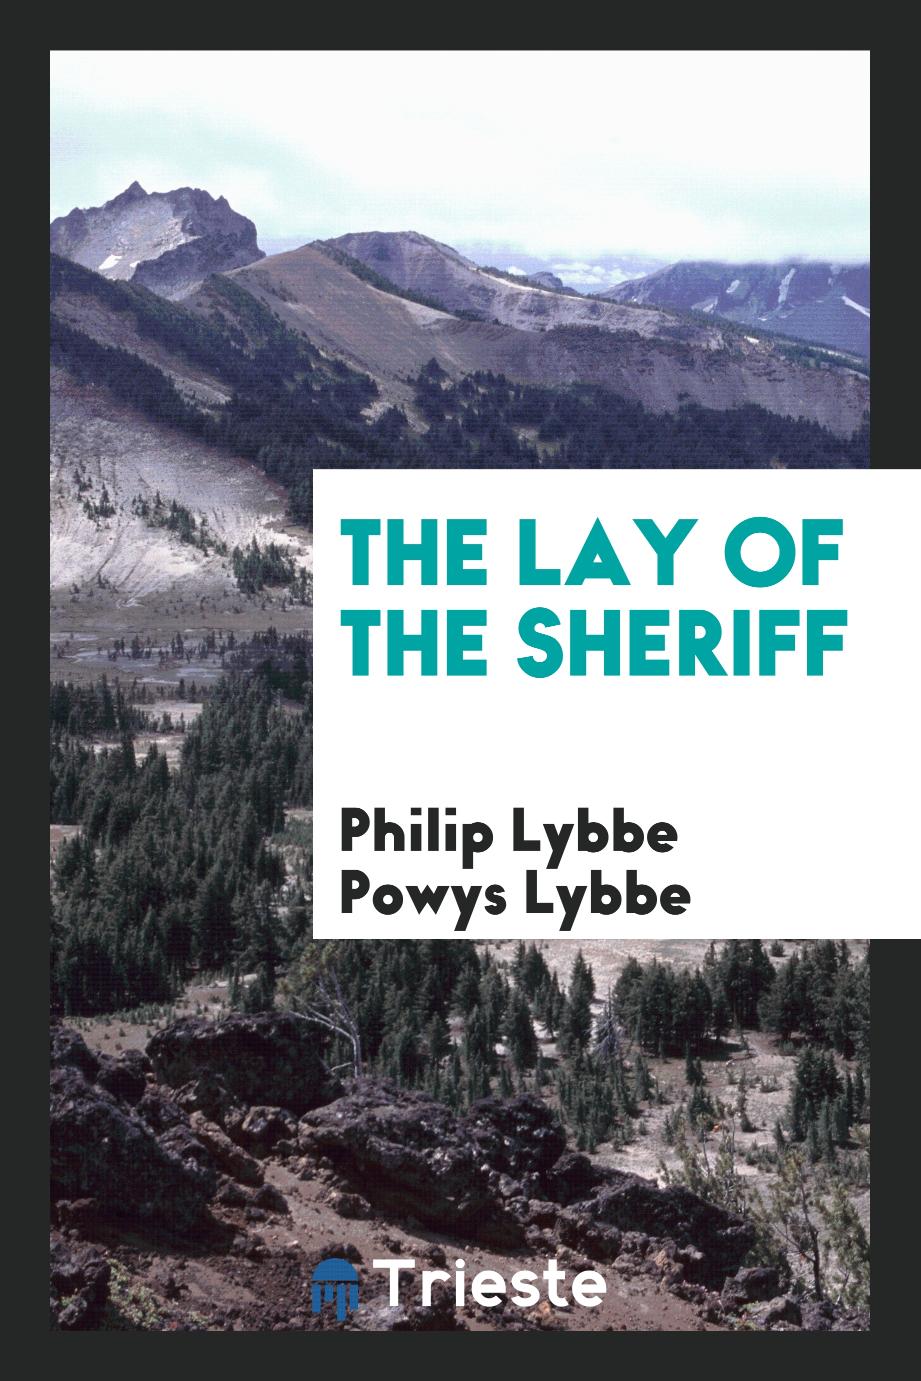 The lay of the sheriff